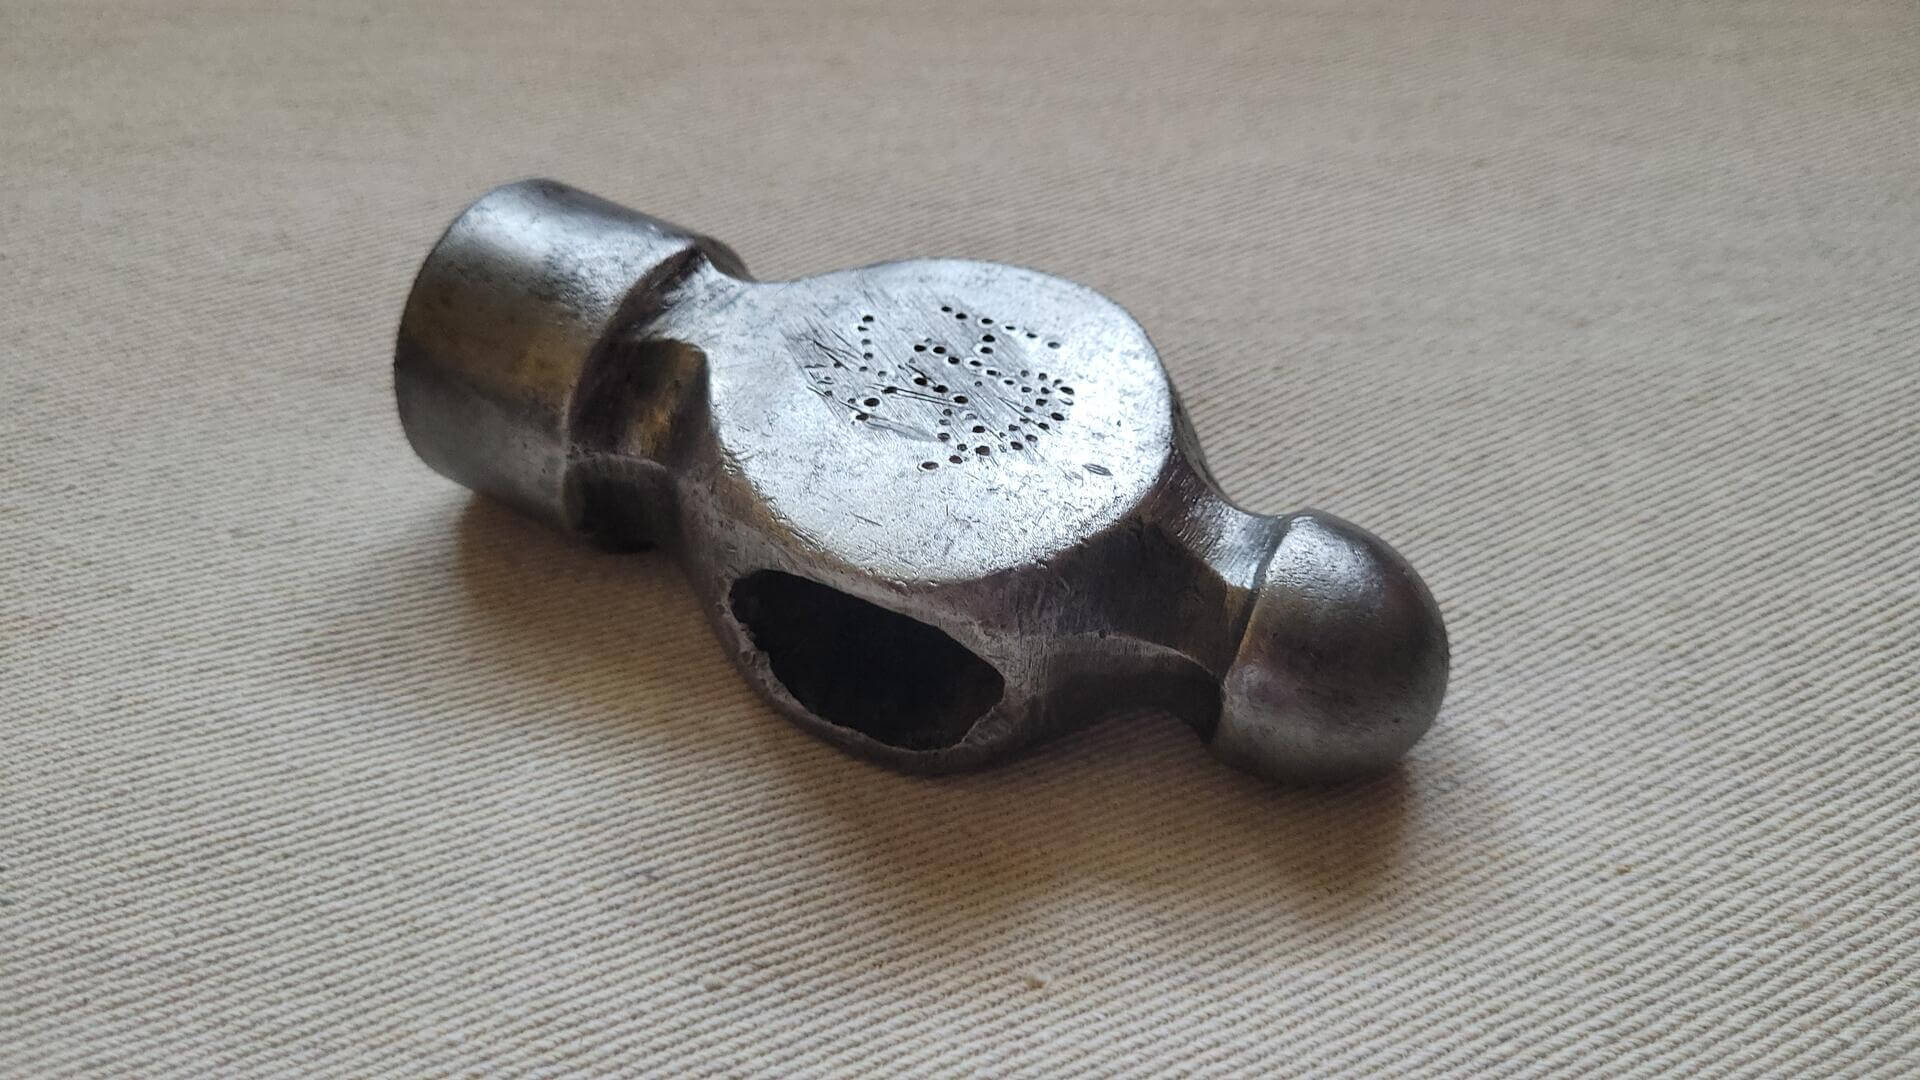 Rare vintage James Smart Mfg Co Ltd cast steel 25OZ ball pein hammer made in Brockville ON. Made in Canada antique collectible hand tools